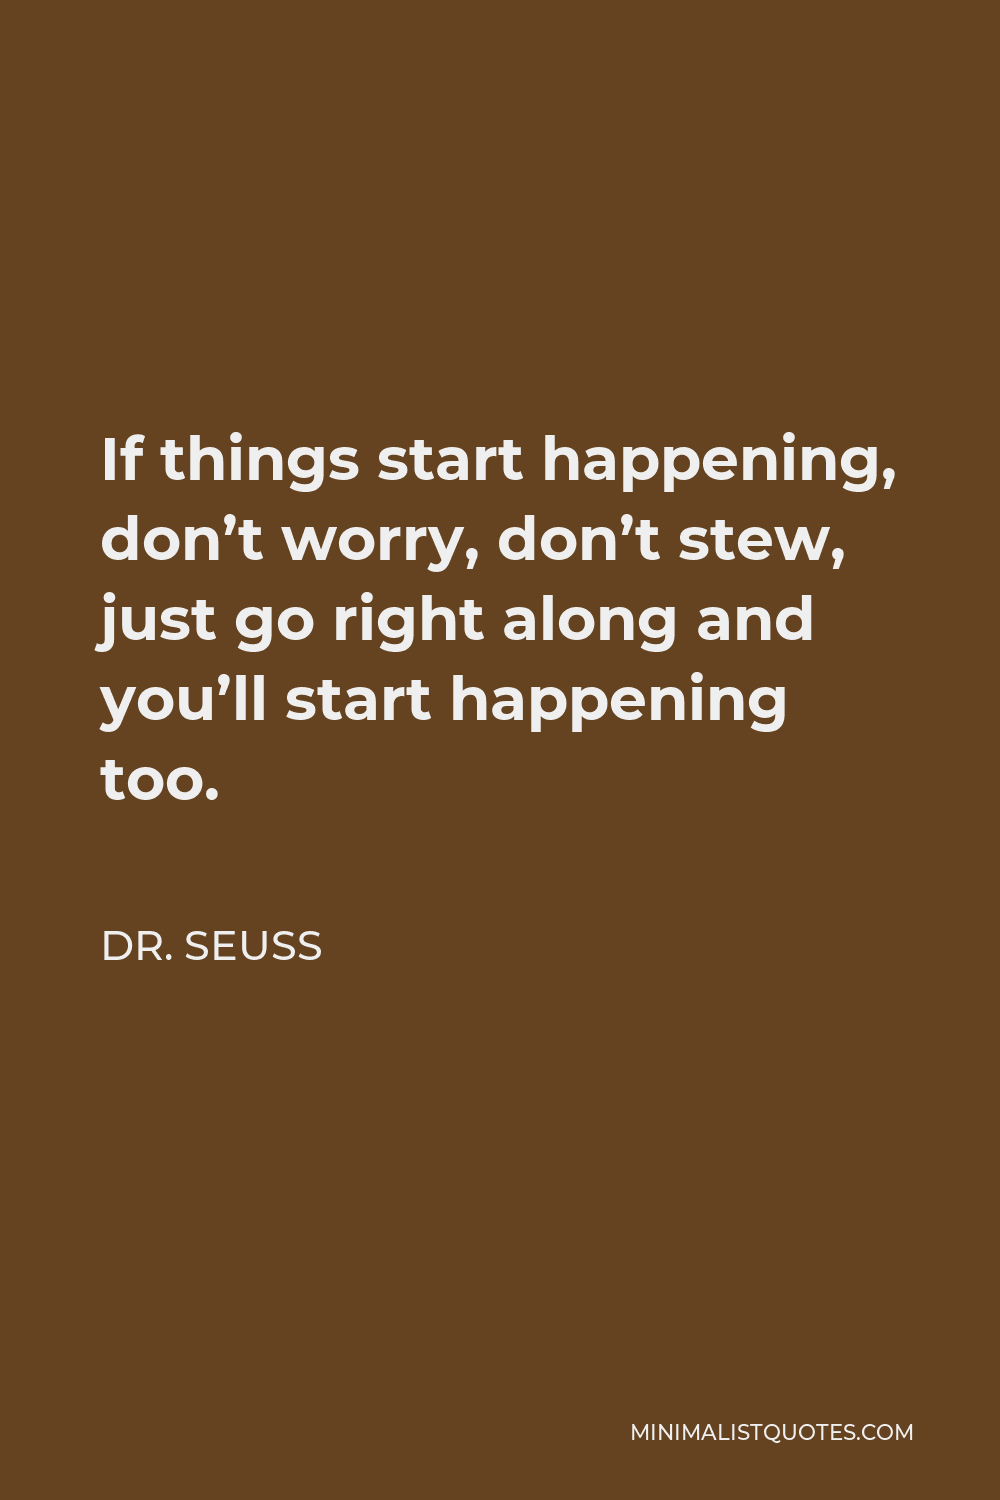 Dr. Seuss Quote - If things start happening, don’t worry, don’t stew, just go right along and you’ll start happening too.